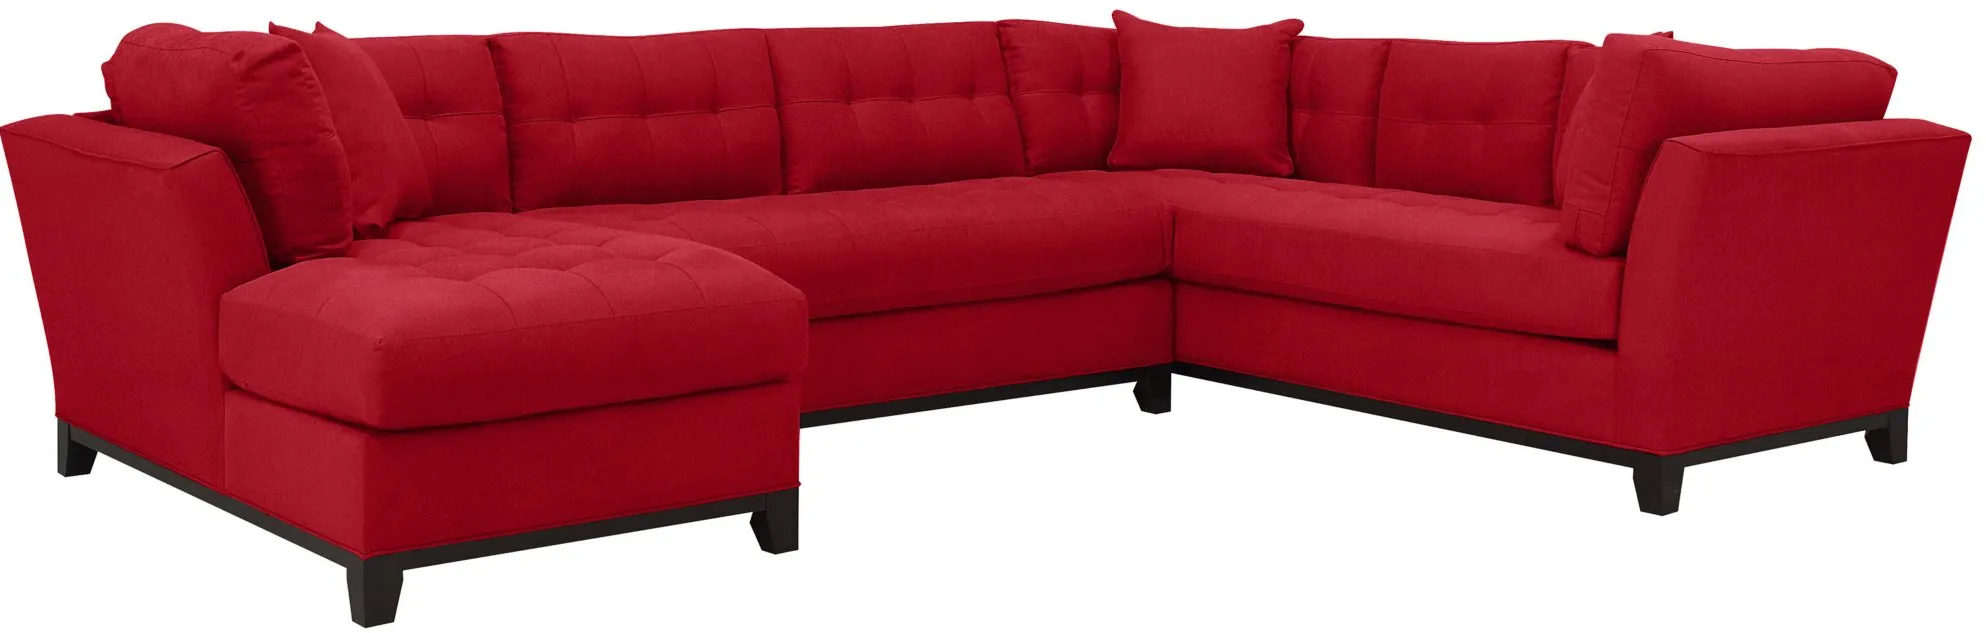 Cityscape 3-pc. Sectional in Cardinal by H.M. Richards